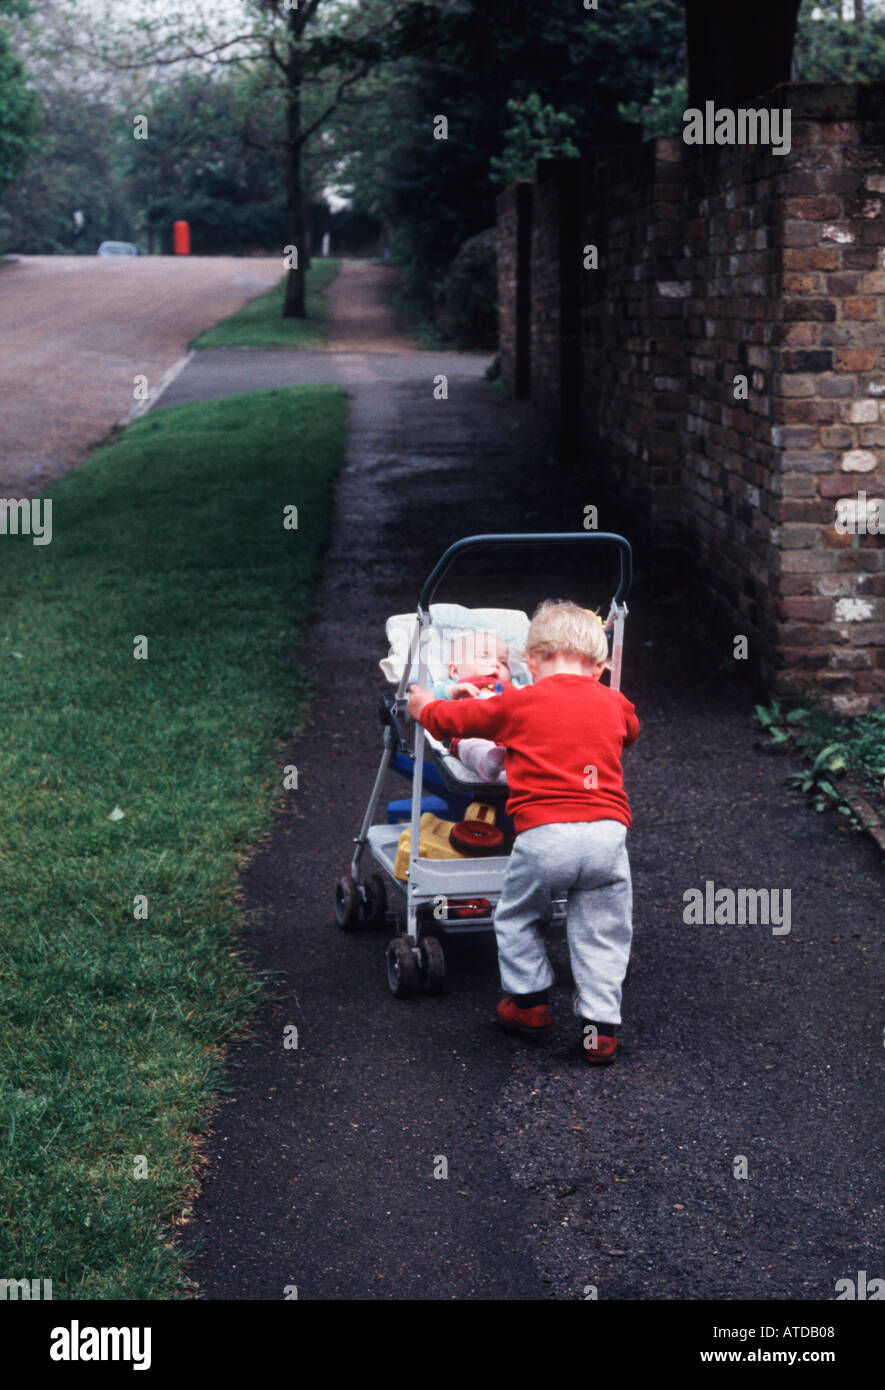 Little boy of about three 3 years old in a red top pushing his baby sister along a pavement sidewalk in a pram Stock Photo